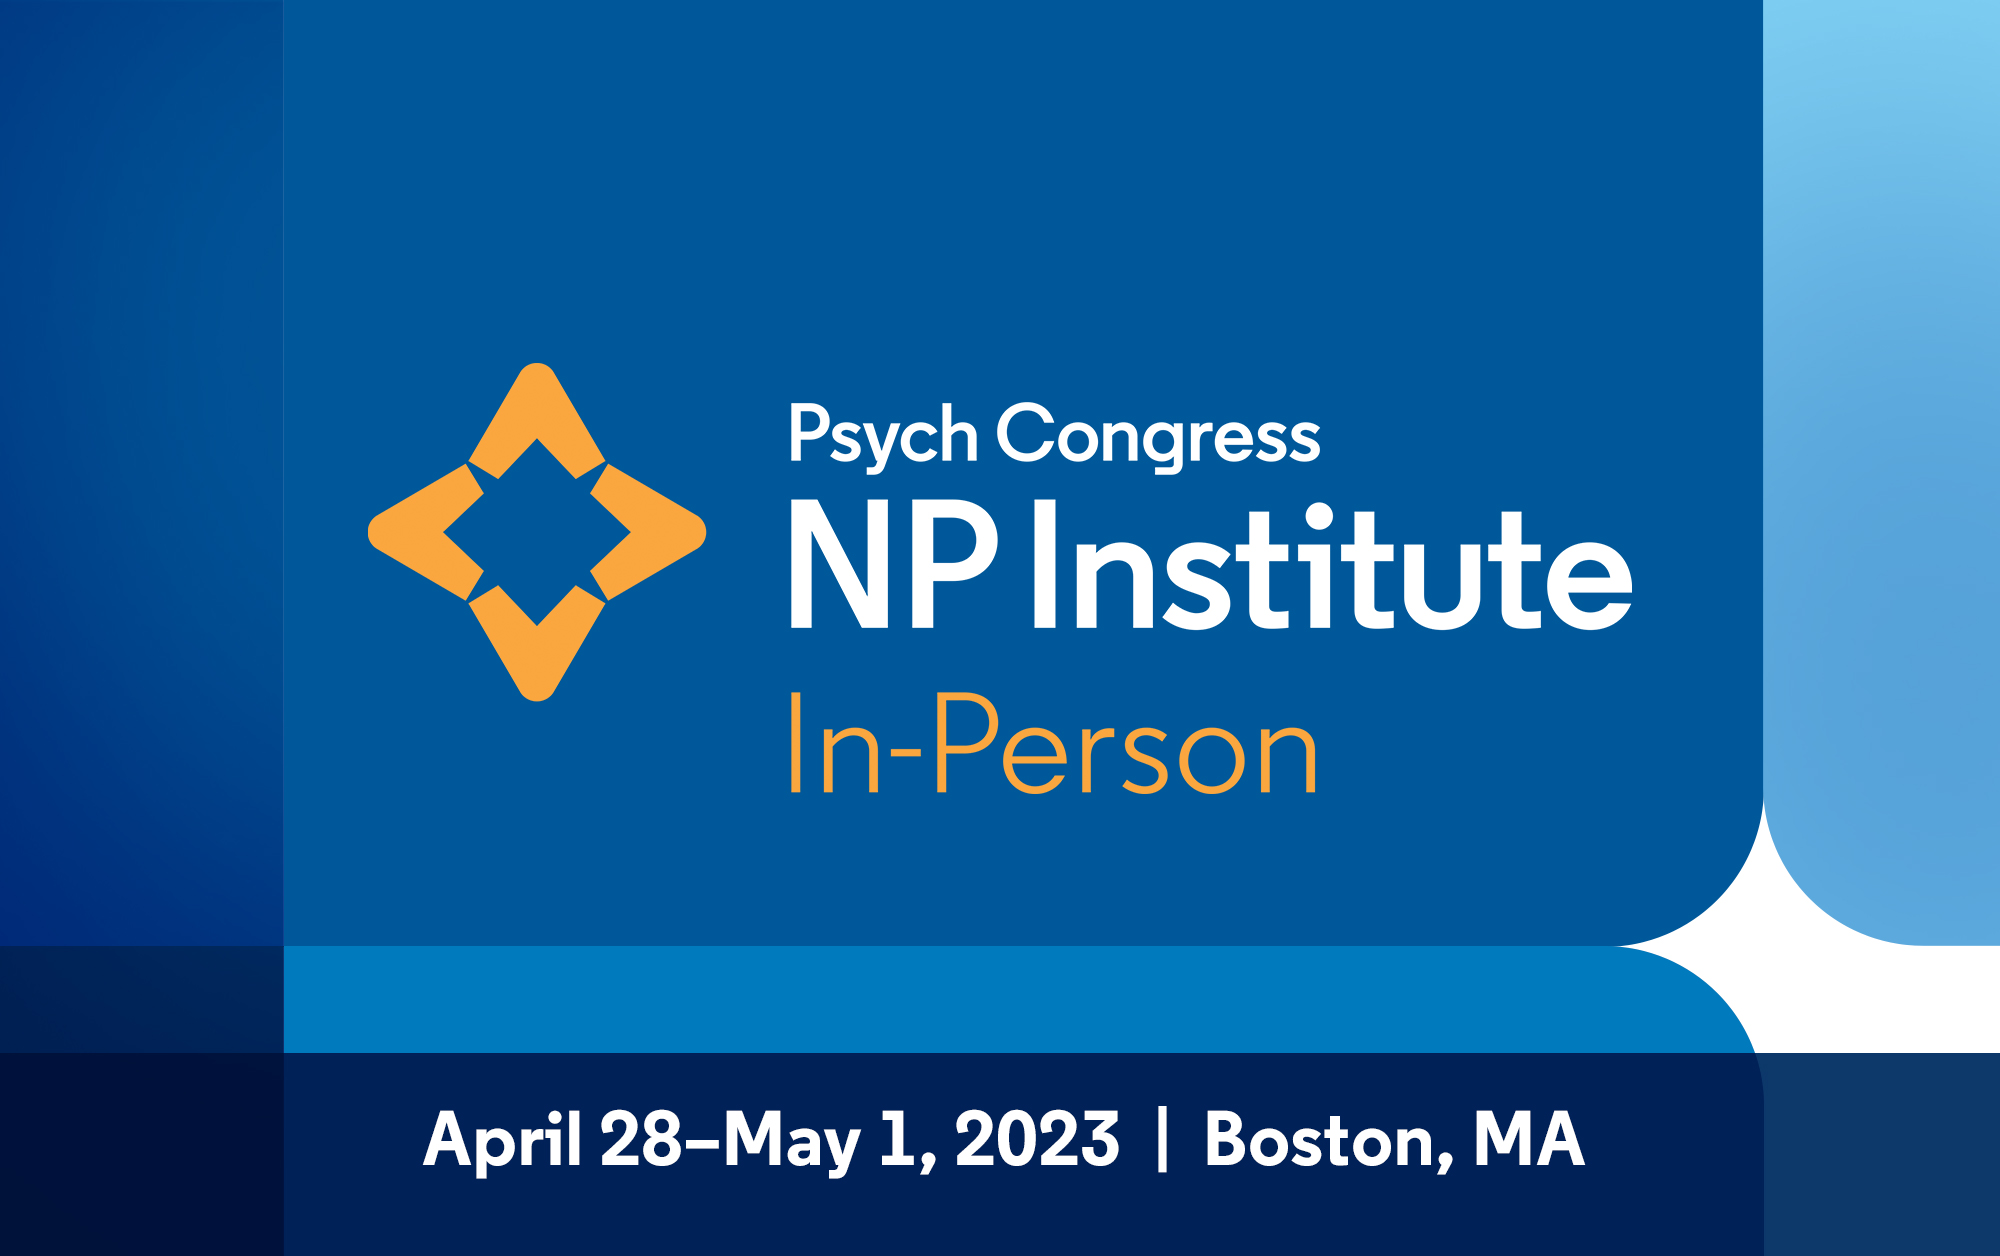 HMP Global’s Psych Congress launches NP Institute In-Person event, new